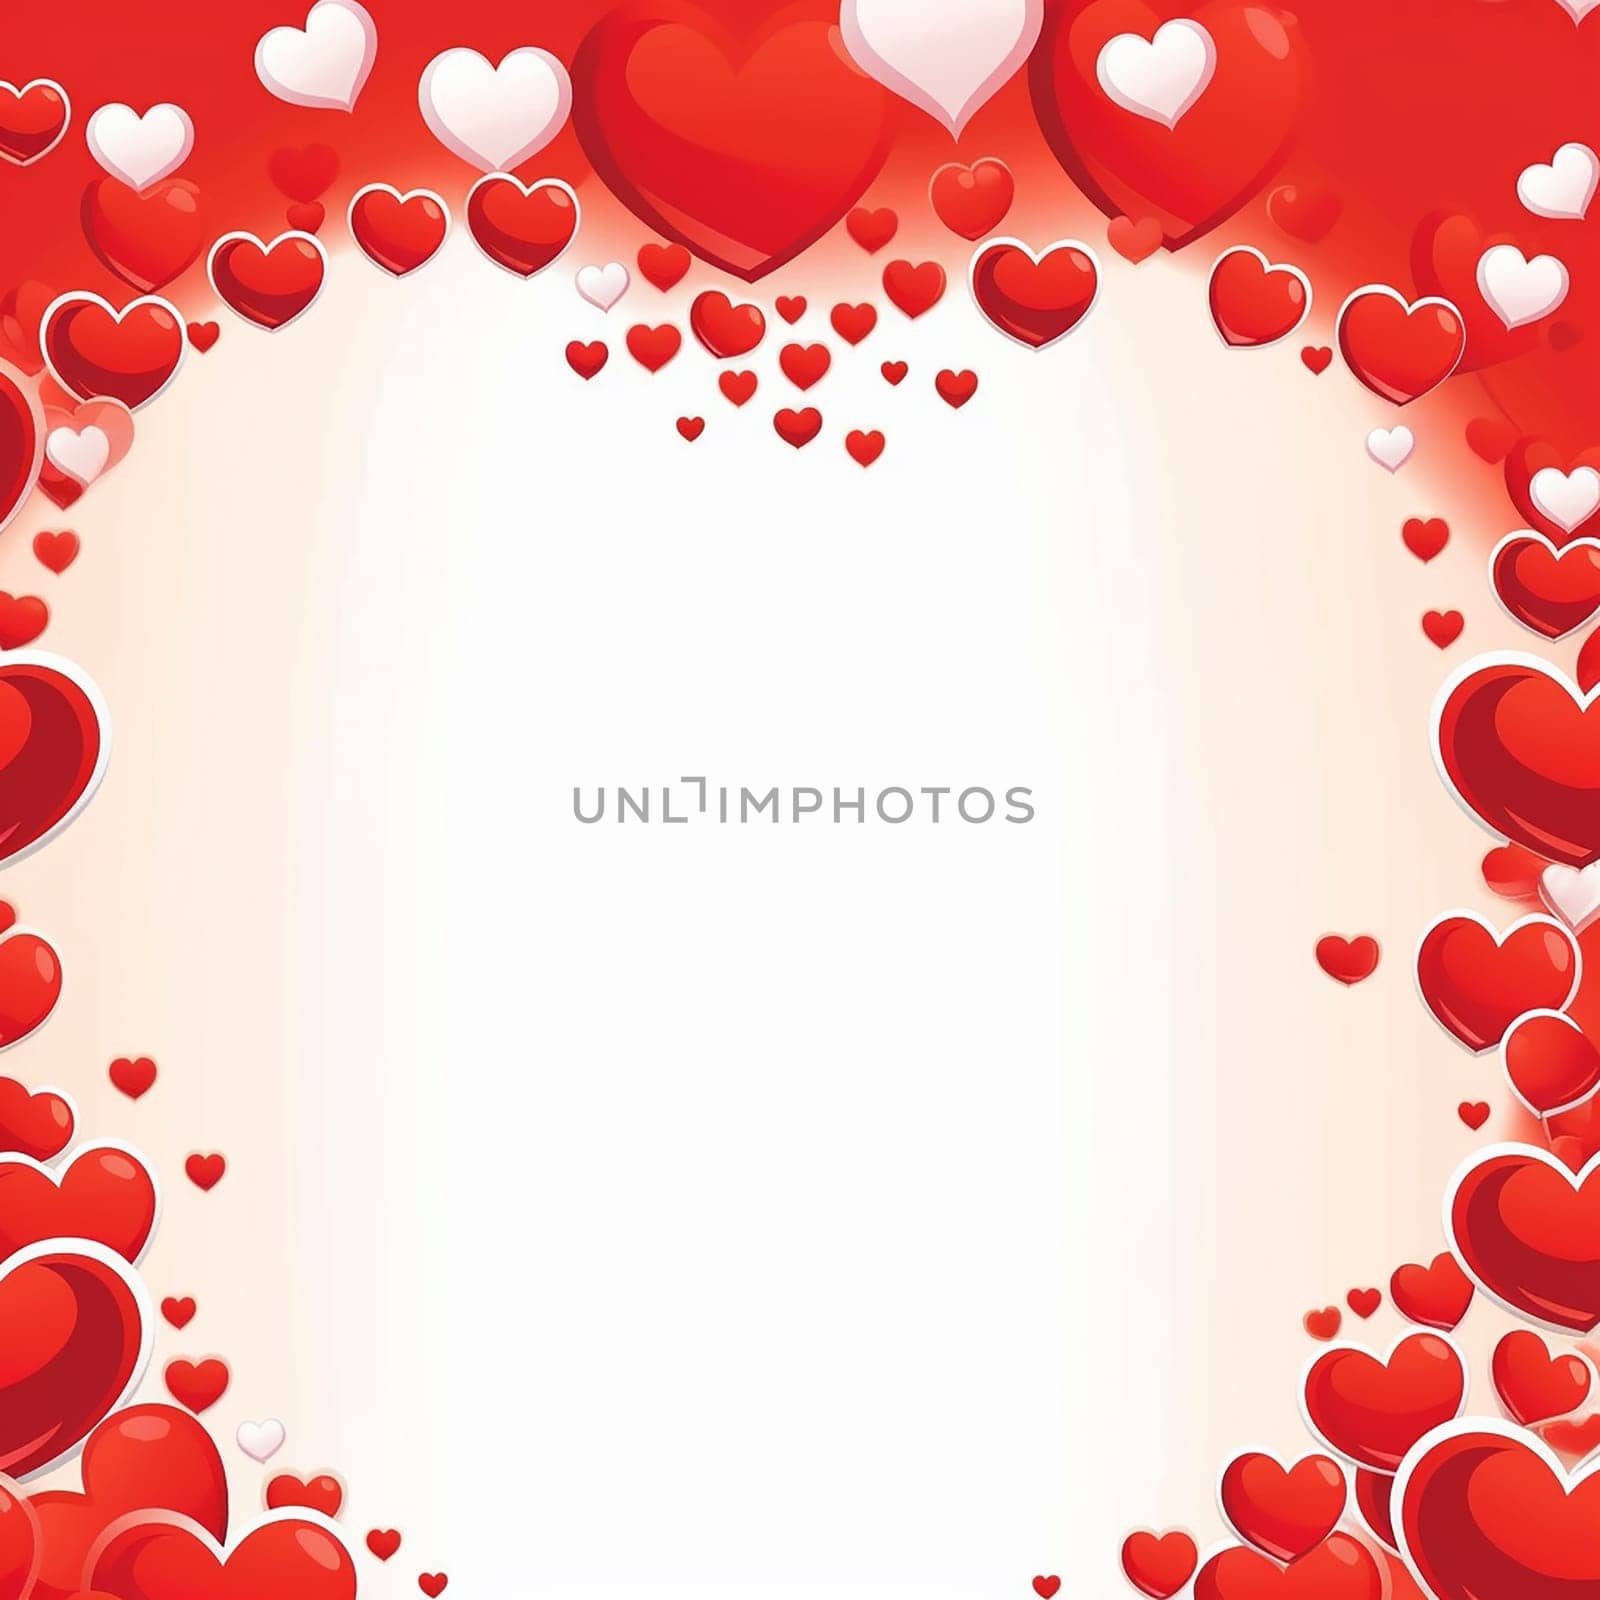 A festive array of hearts in varying sizes on a red and white background. by Hype2art